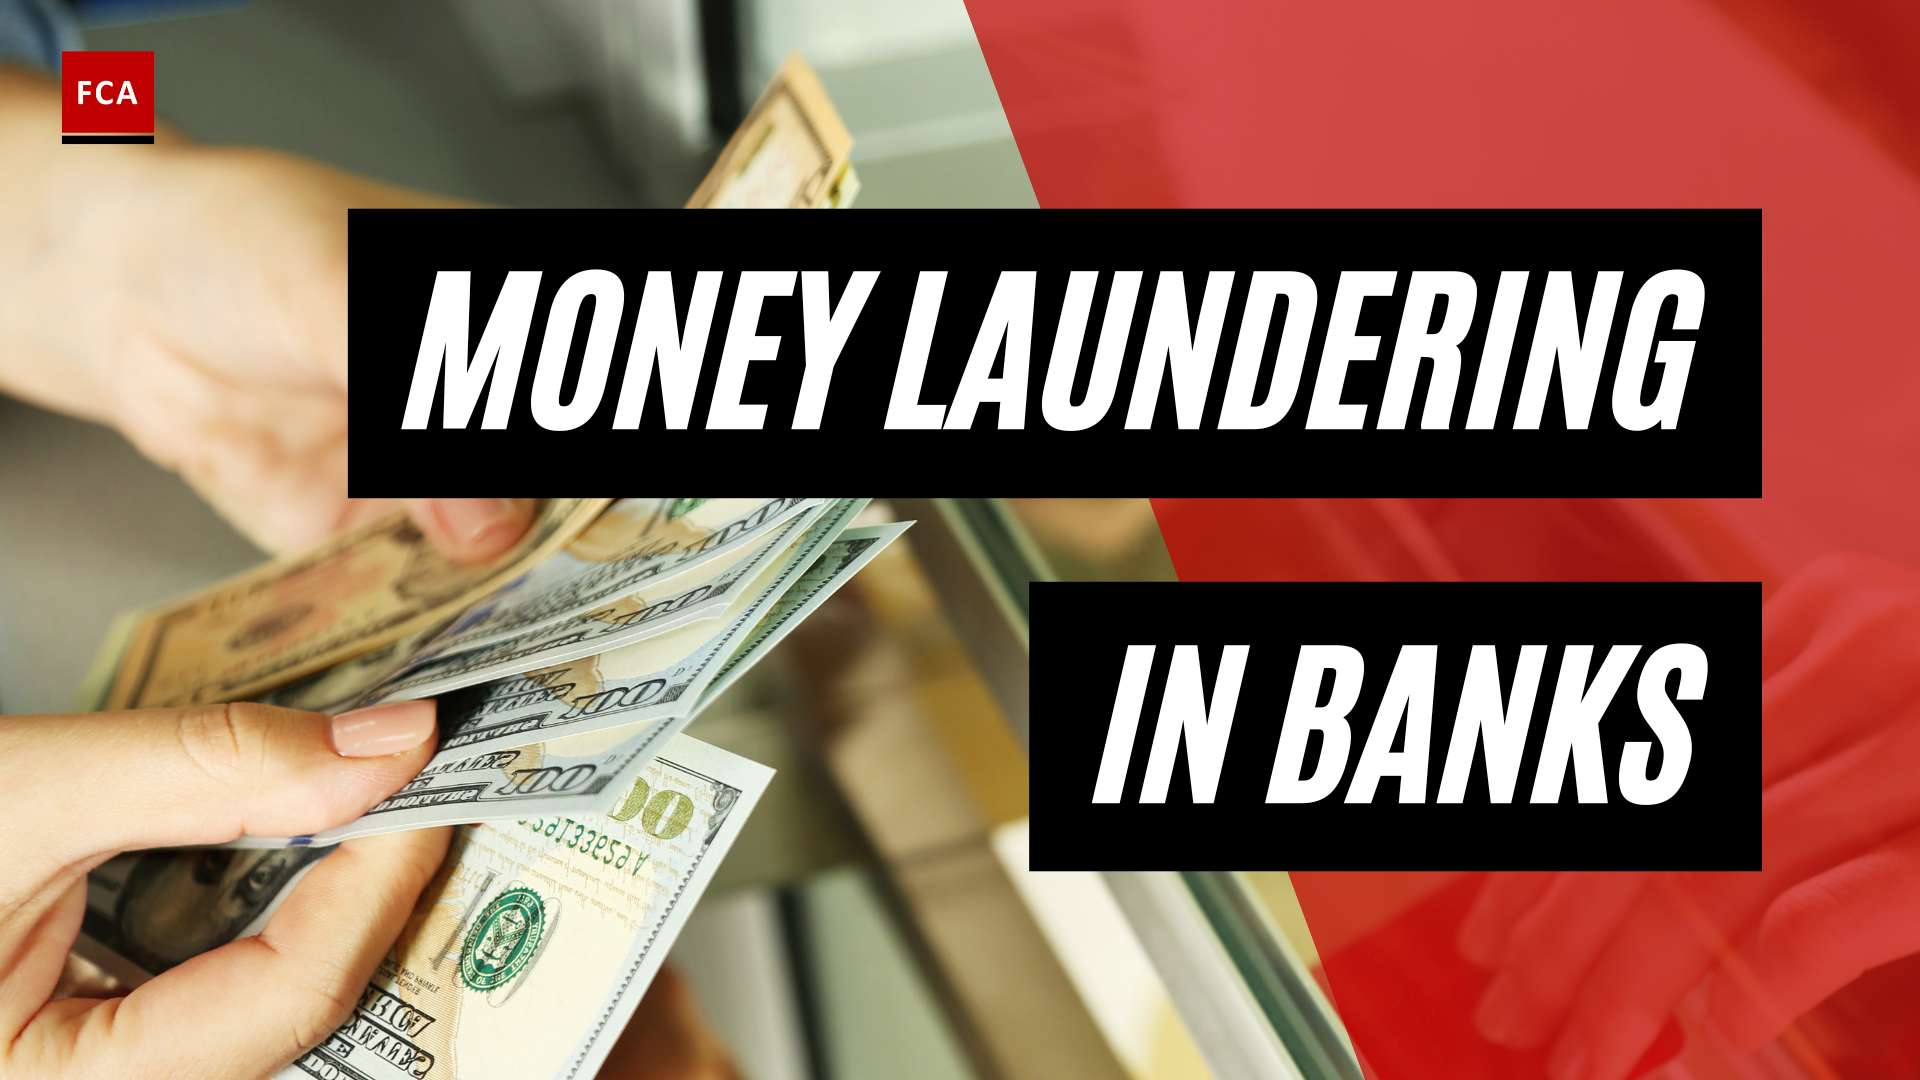 The Dirty Money Game: Tracing Money Laundering In Banks